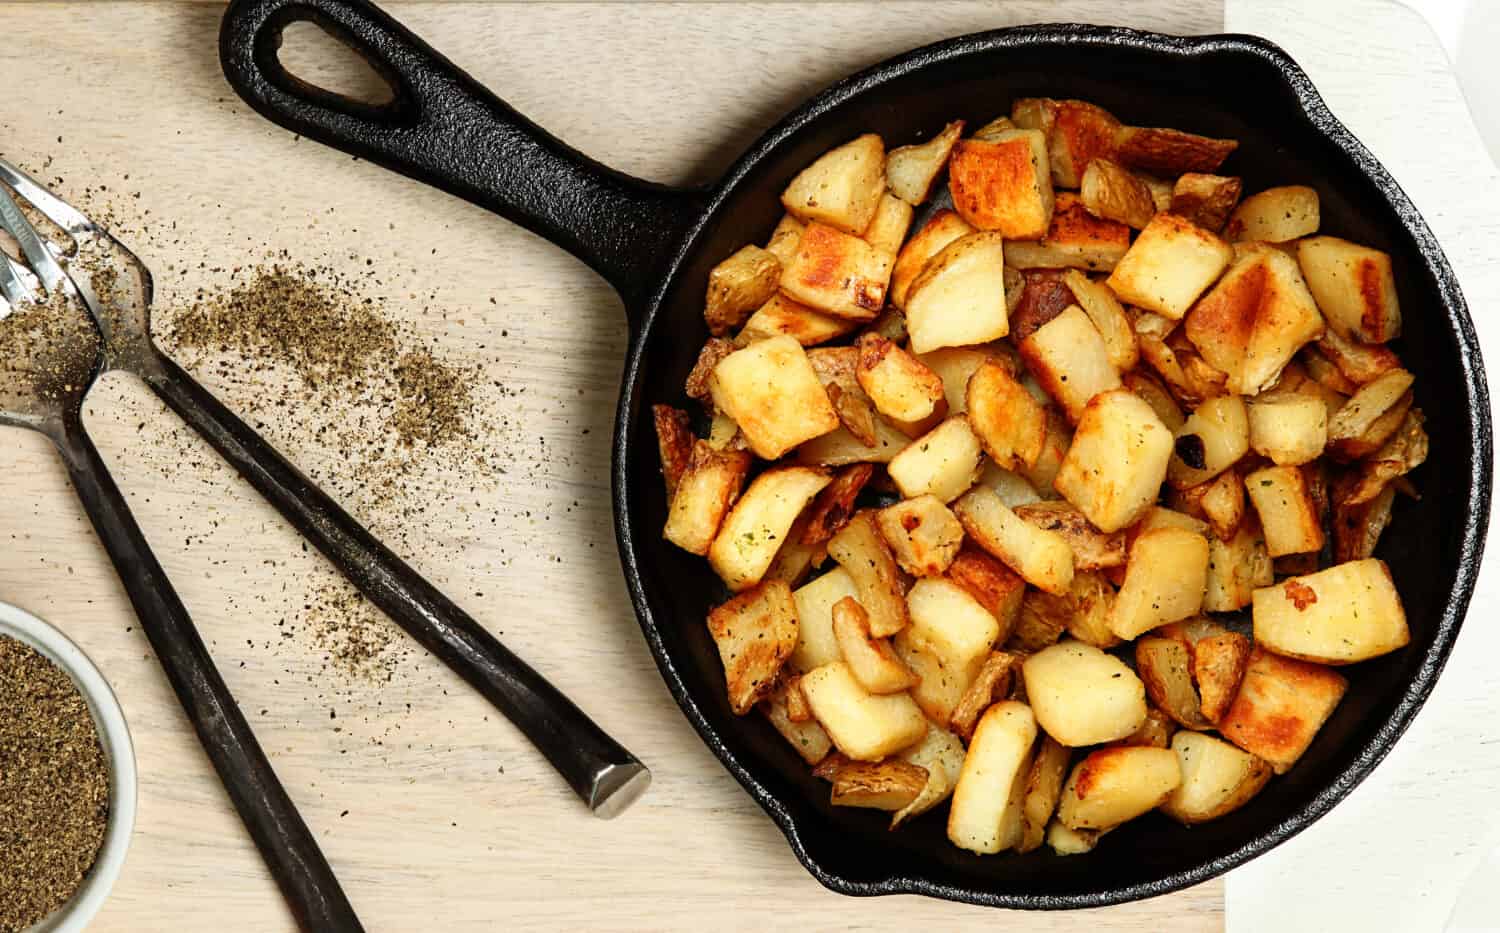 Ranch Potatoes in Cast Iron Skillet on Cutting Board with Black Pepper.